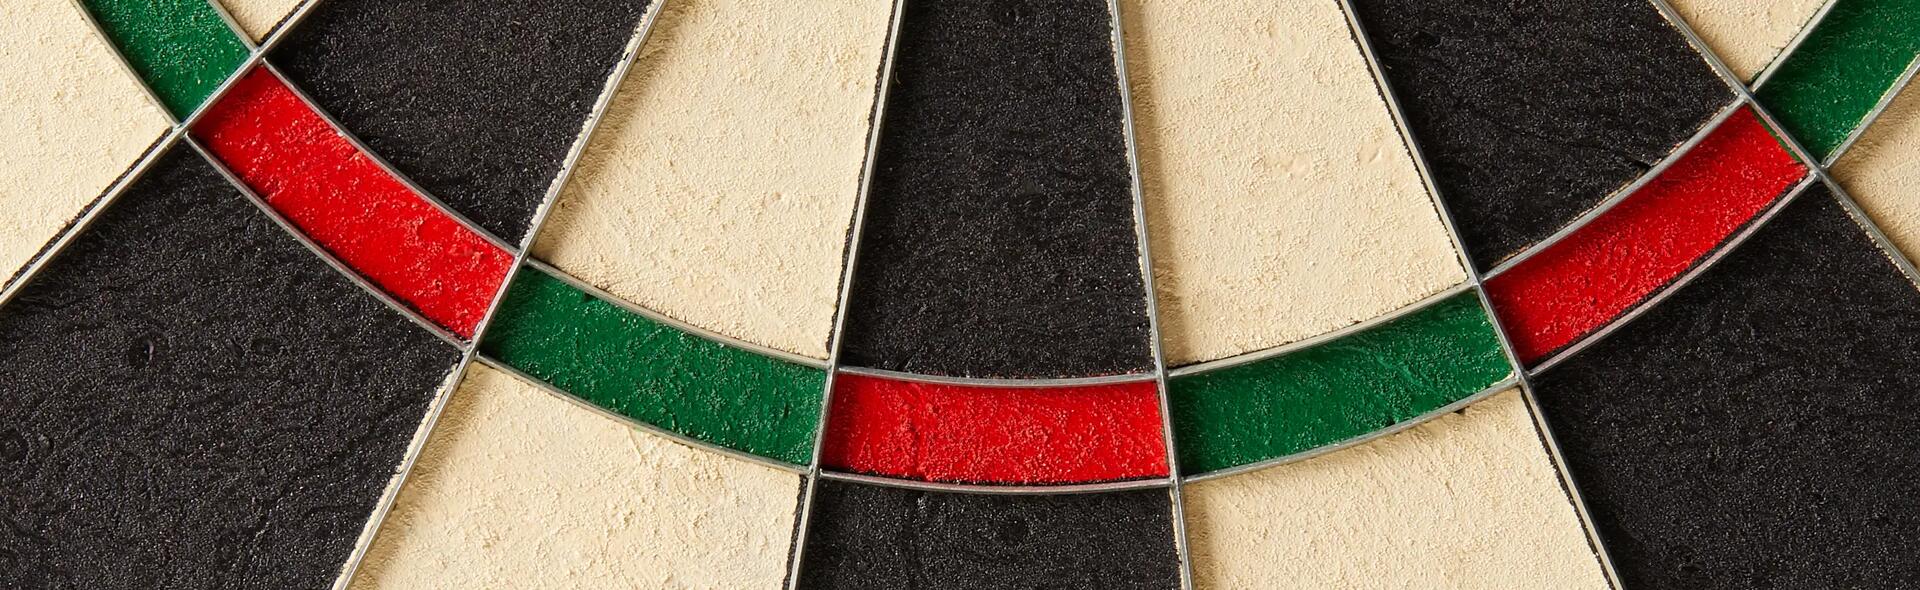 A close up of a Canaveral dart board